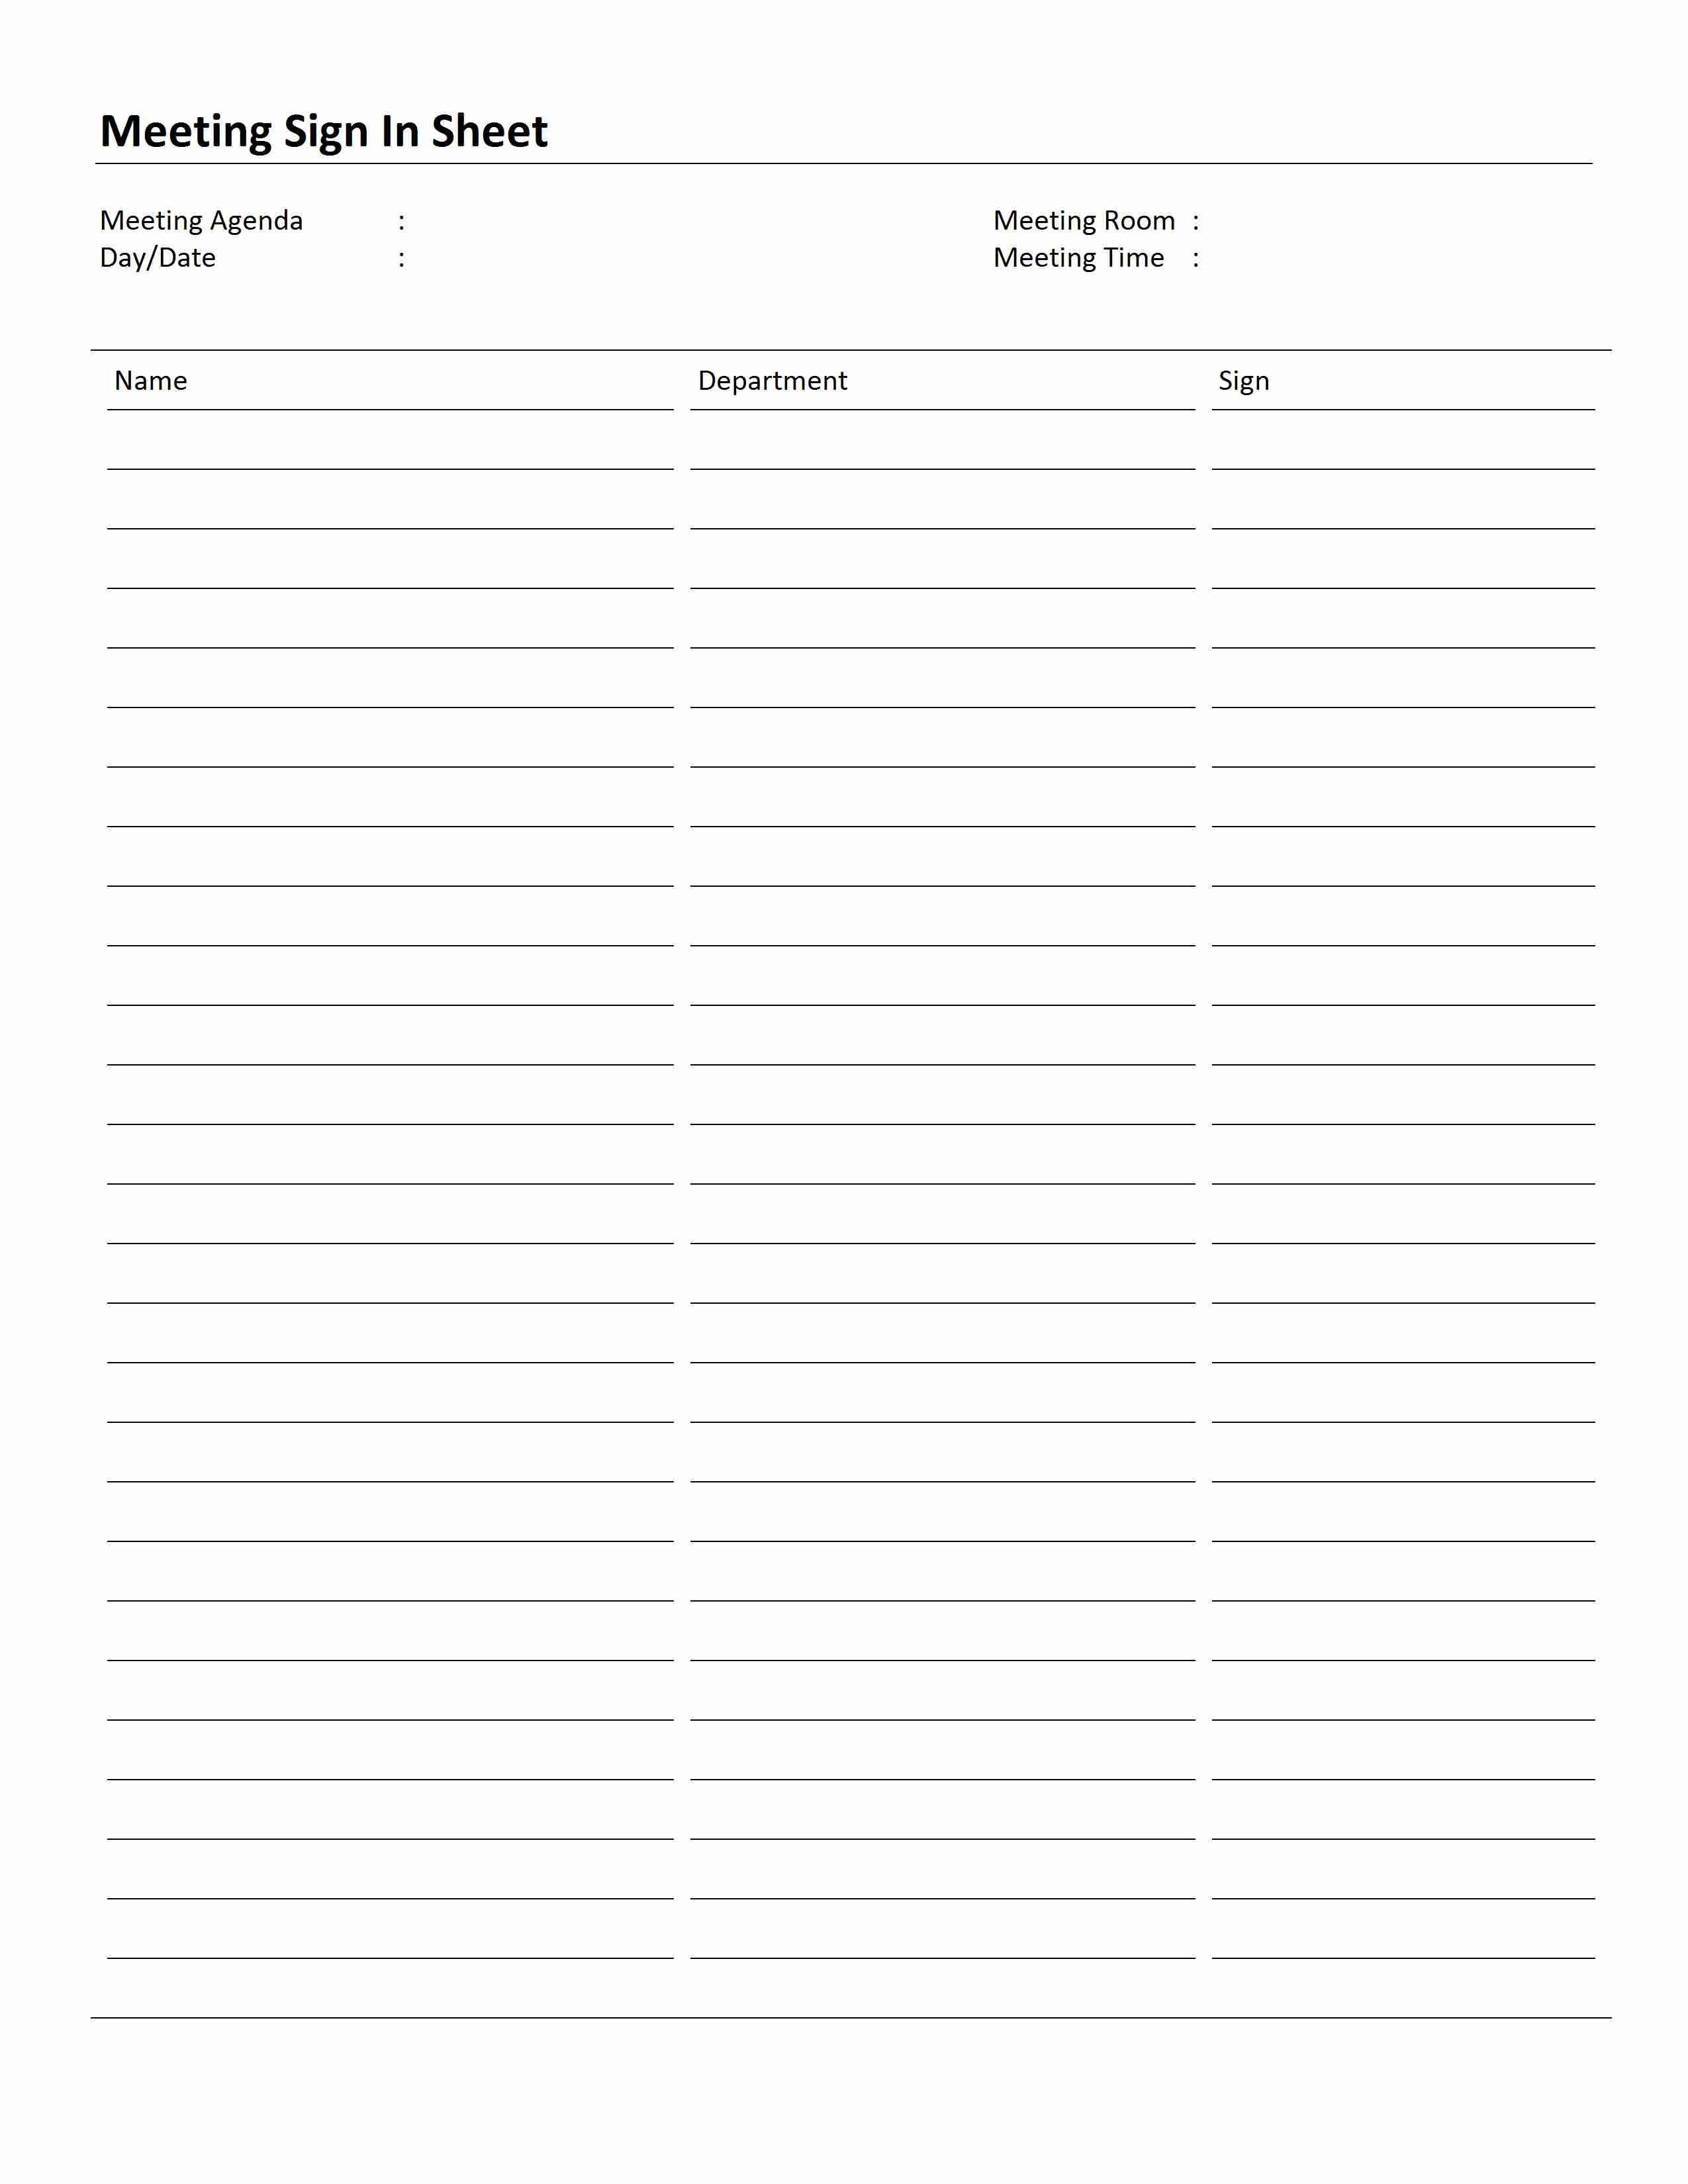 40-sign-up-sheet-sign-in-sheet-templates-word-excel-40-sign-up-sheet